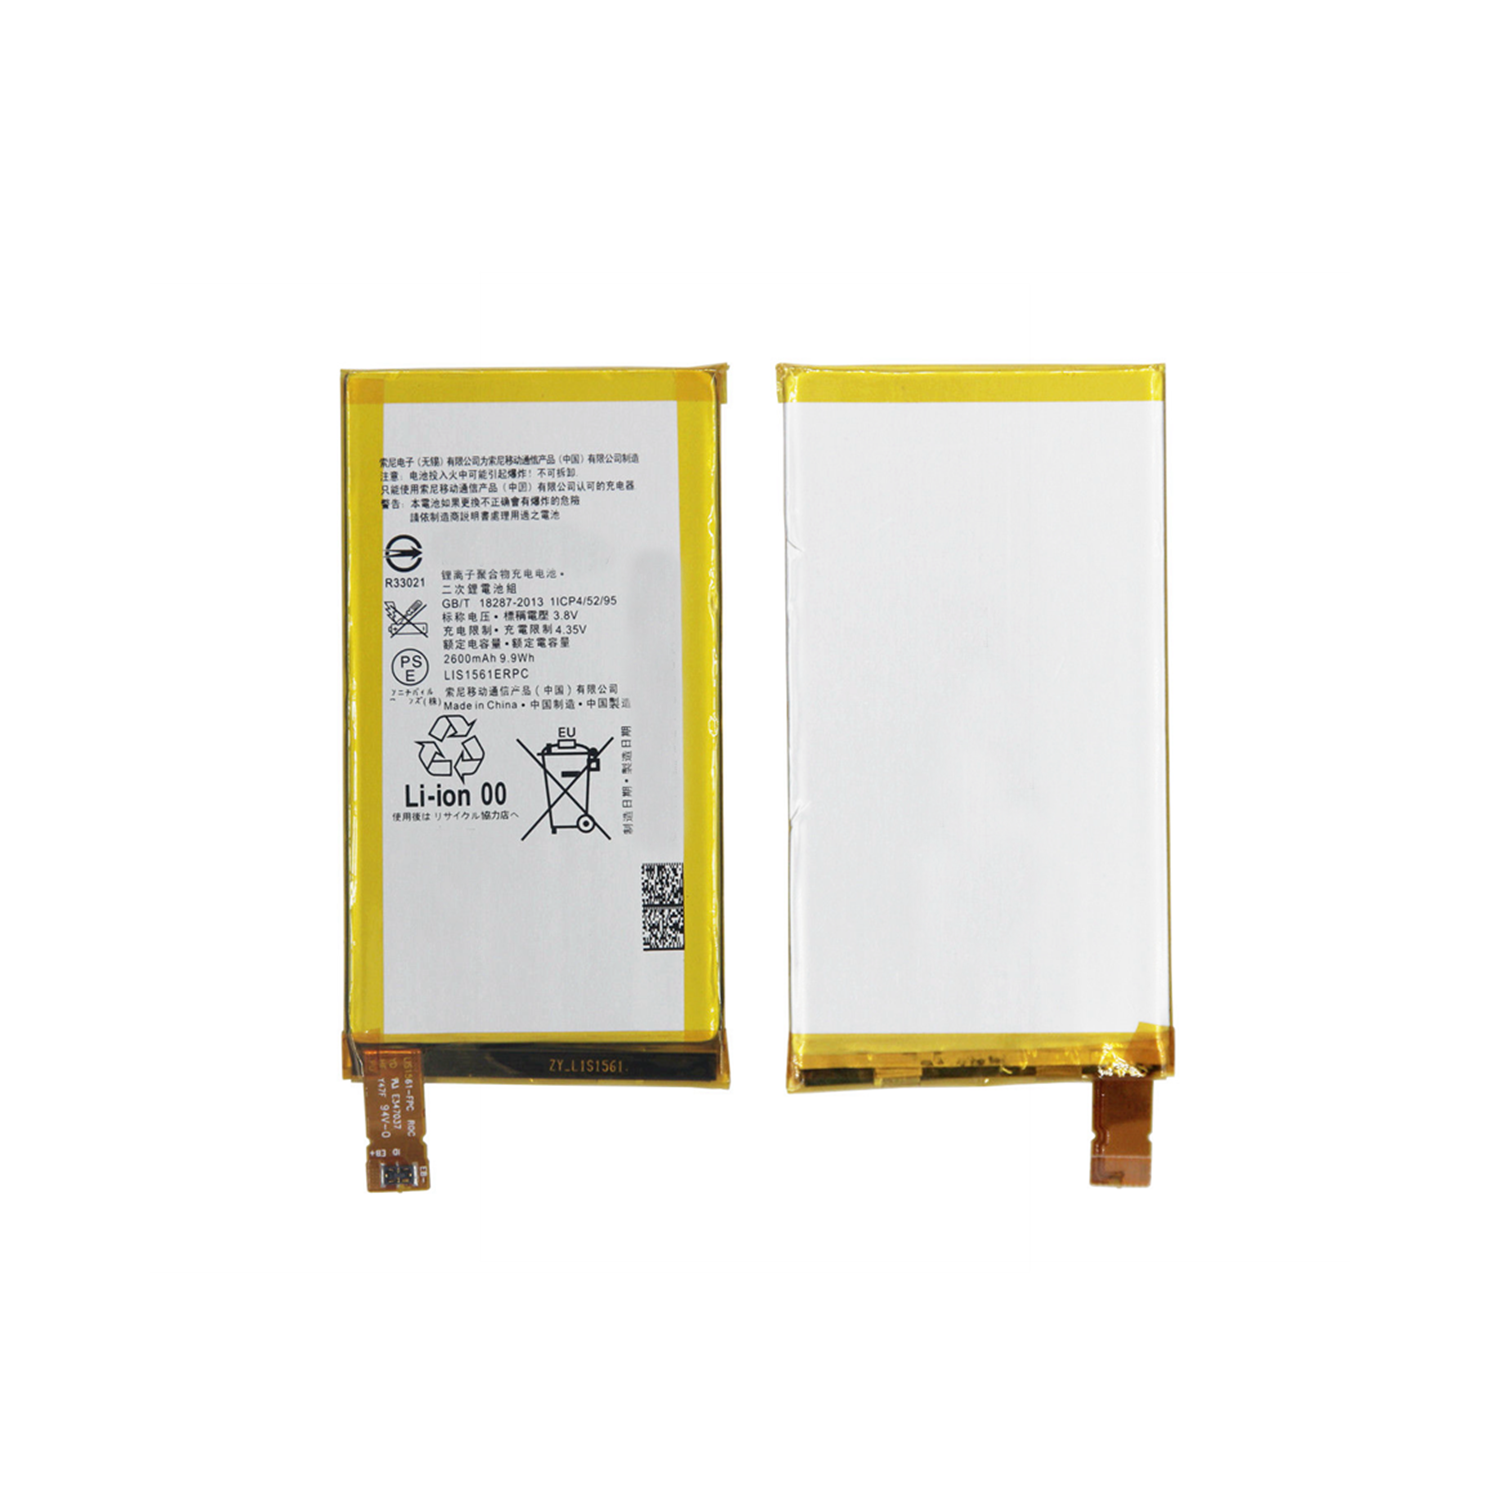 Sony Xperia Z3 Compact Battery Replacement